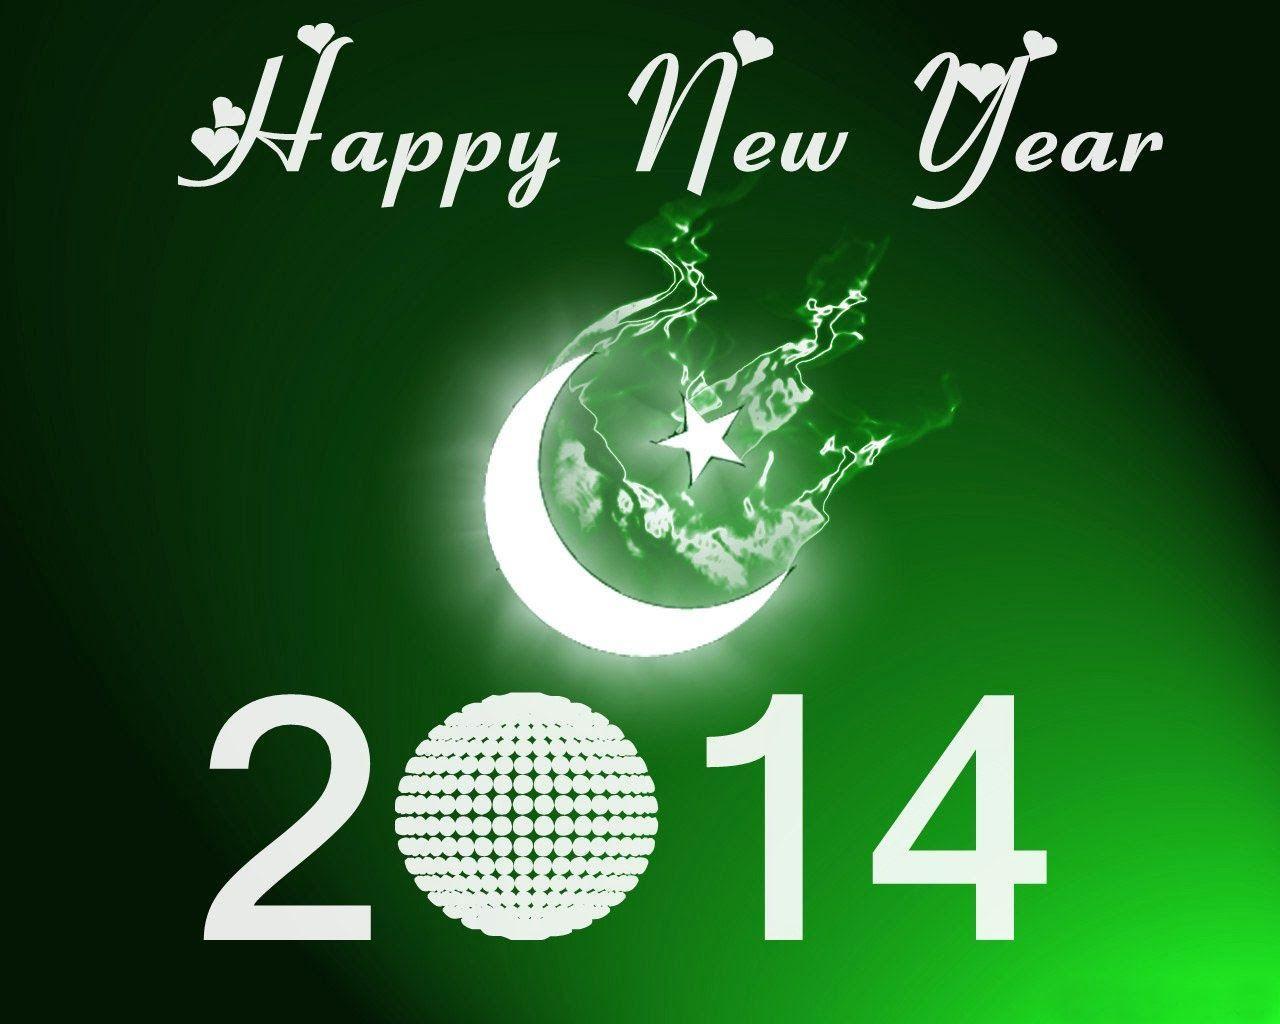 New Year 2014 Greetings, Wishes Cards for Pakistan